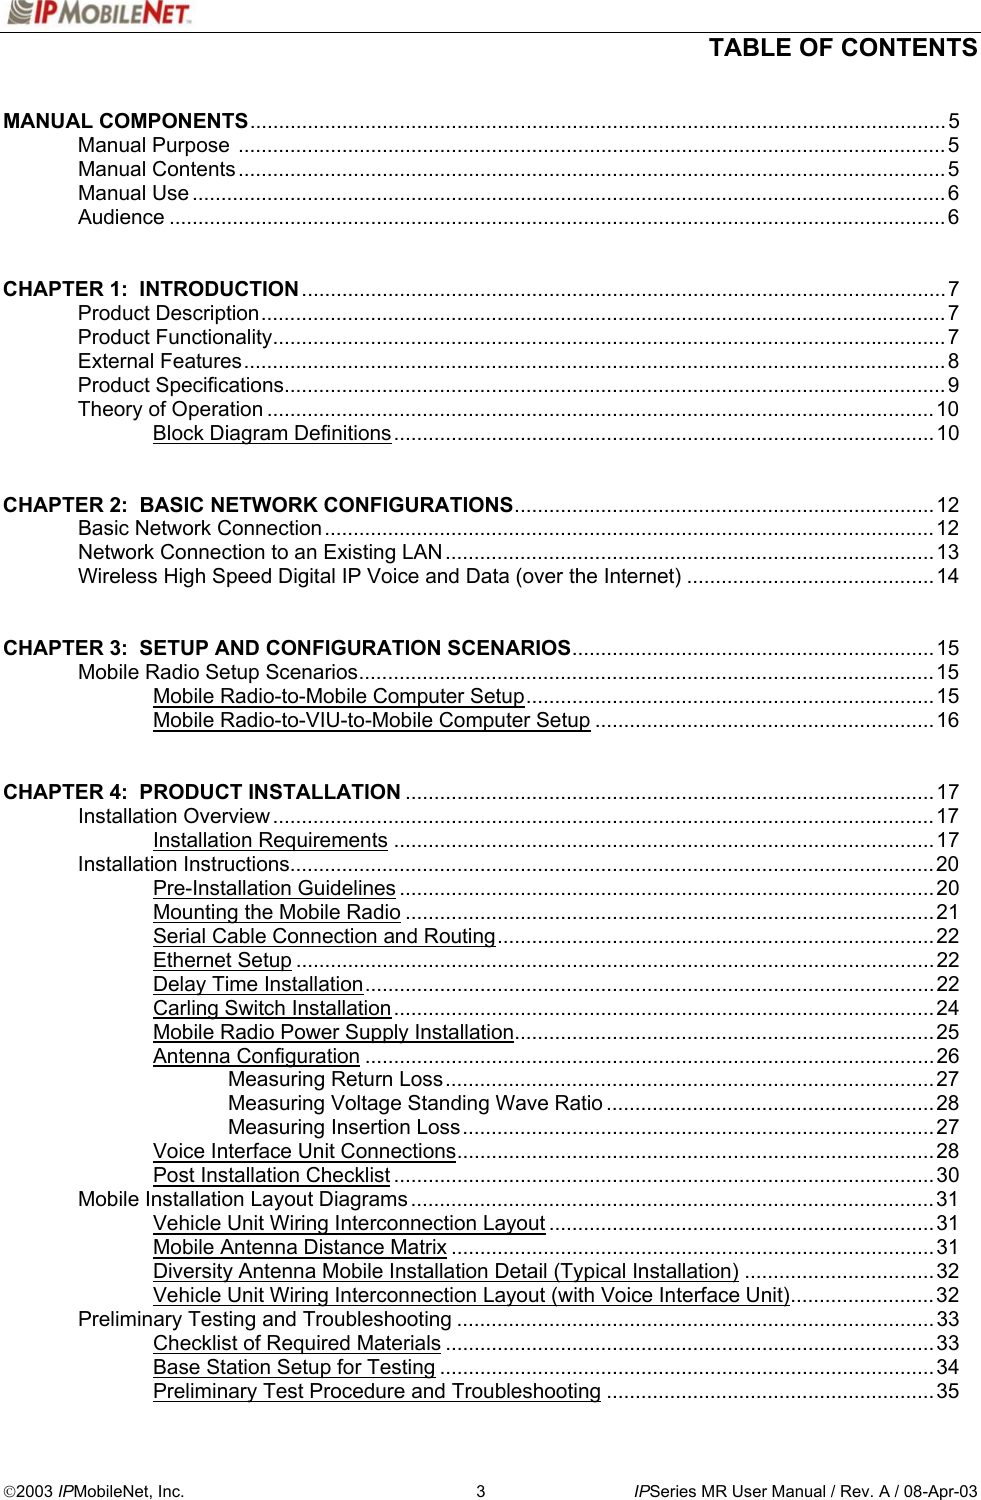   TABLE OF CONTENTS  2003 IPMobileNet, Inc.  3  IPSeries MR User Manual / Rev. A / 08-Apr-03  MANUAL COMPONENTS.........................................................................................................................5  Manual Purpose ...........................................................................................................................5  Manual Contents ...........................................................................................................................5  Manual Use ...................................................................................................................................6  Audience .......................................................................................................................................6   CHAPTER 1:  INTRODUCTION................................................................................................................7  Product Description.......................................................................................................................7  Product Functionality.....................................................................................................................7  External Features..........................................................................................................................8  Product Specifications...................................................................................................................9   Theory of Operation ....................................................................................................................10   Block Diagram Definitions..............................................................................................10   CHAPTER 2:  BASIC NETWORK CONFIGURATIONS.........................................................................12  Basic Network Connection..........................................................................................................12  Network Connection to an Existing LAN .....................................................................................13   Wireless High Speed Digital IP Voice and Data (over the Internet) ...........................................14   CHAPTER 3:  SETUP AND CONFIGURATION SCENARIOS...............................................................15  Mobile Radio Setup Scenarios....................................................................................................15   Mobile Radio-to-Mobile Computer Setup.......................................................................15     Mobile Radio-to-VIU-to-Mobile Computer Setup ...........................................................16   CHAPTER 4:  PRODUCT INSTALLATION ............................................................................................17  Installation Overview ...................................................................................................................17   Installation Requirements ..............................................................................................17  Installation Instructions................................................................................................................20   Pre-Installation Guidelines .............................................................................................20   Mounting the Mobile Radio ............................................................................................21     Serial Cable Connection and Routing............................................................................22   Ethernet Setup ...............................................................................................................22   Delay Time Installation...................................................................................................22   Carling Switch Installation..............................................................................................24     Mobile Radio Power Supply Installation.........................................................................25   Antenna Configuration ...................................................................................................26    Measuring Return Loss.....................................................................................27    Measuring Voltage Standing Wave Ratio .........................................................28    Measuring Insertion Loss..................................................................................27     Voice Interface Unit Connections...................................................................................28   Post Installation Checklist .............................................................................................. 30  Mobile Installation Layout Diagrams ...........................................................................................31     Vehicle Unit Wiring Interconnection Layout ...................................................................31   Mobile Antenna Distance Matrix ....................................................................................31     Diversity Antenna Mobile Installation Detail (Typical Installation) .................................32   Vehicle Unit Wiring Interconnection Layout (with Voice Interface Unit).........................32  Preliminary Testing and Troubleshooting ...................................................................................33     Checklist of Required Materials .....................................................................................33     Base Station Setup for Testing ......................................................................................34     Preliminary Test Procedure and Troubleshooting .........................................................35 